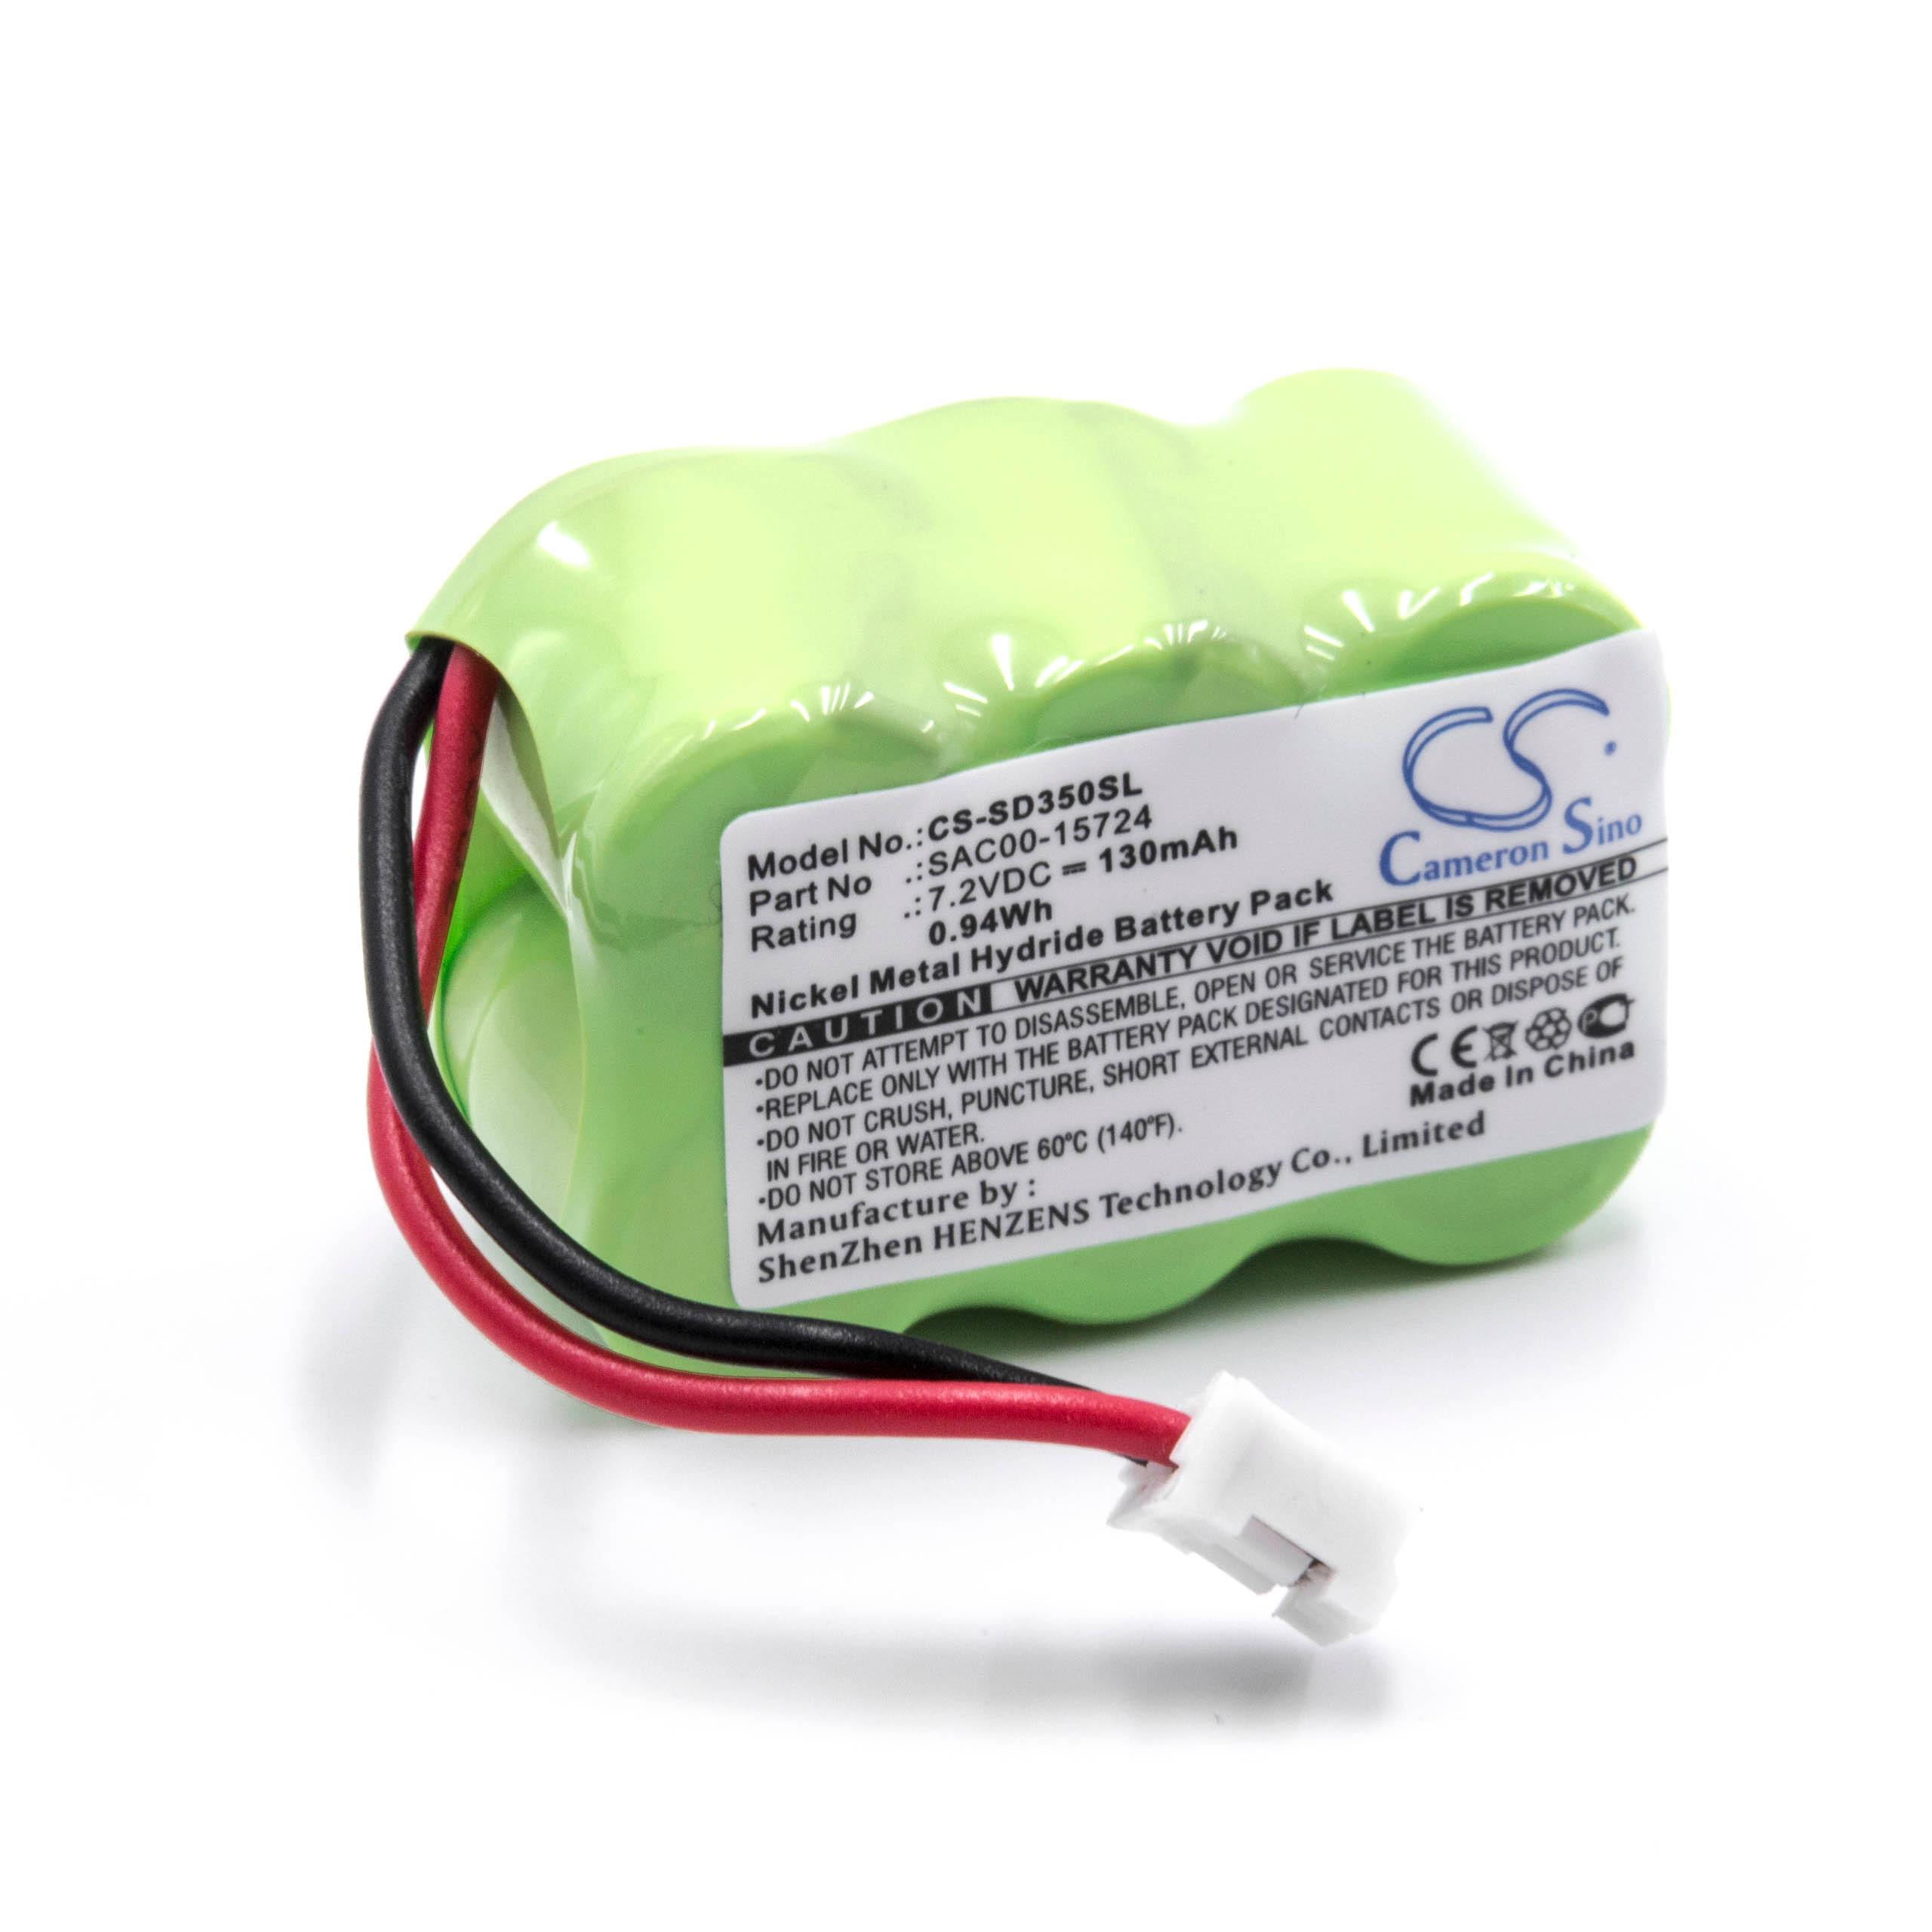 Dog Trainer Battery Replacement for Sportdog SAC00-15724 - 130mAh 7.2V NiMH